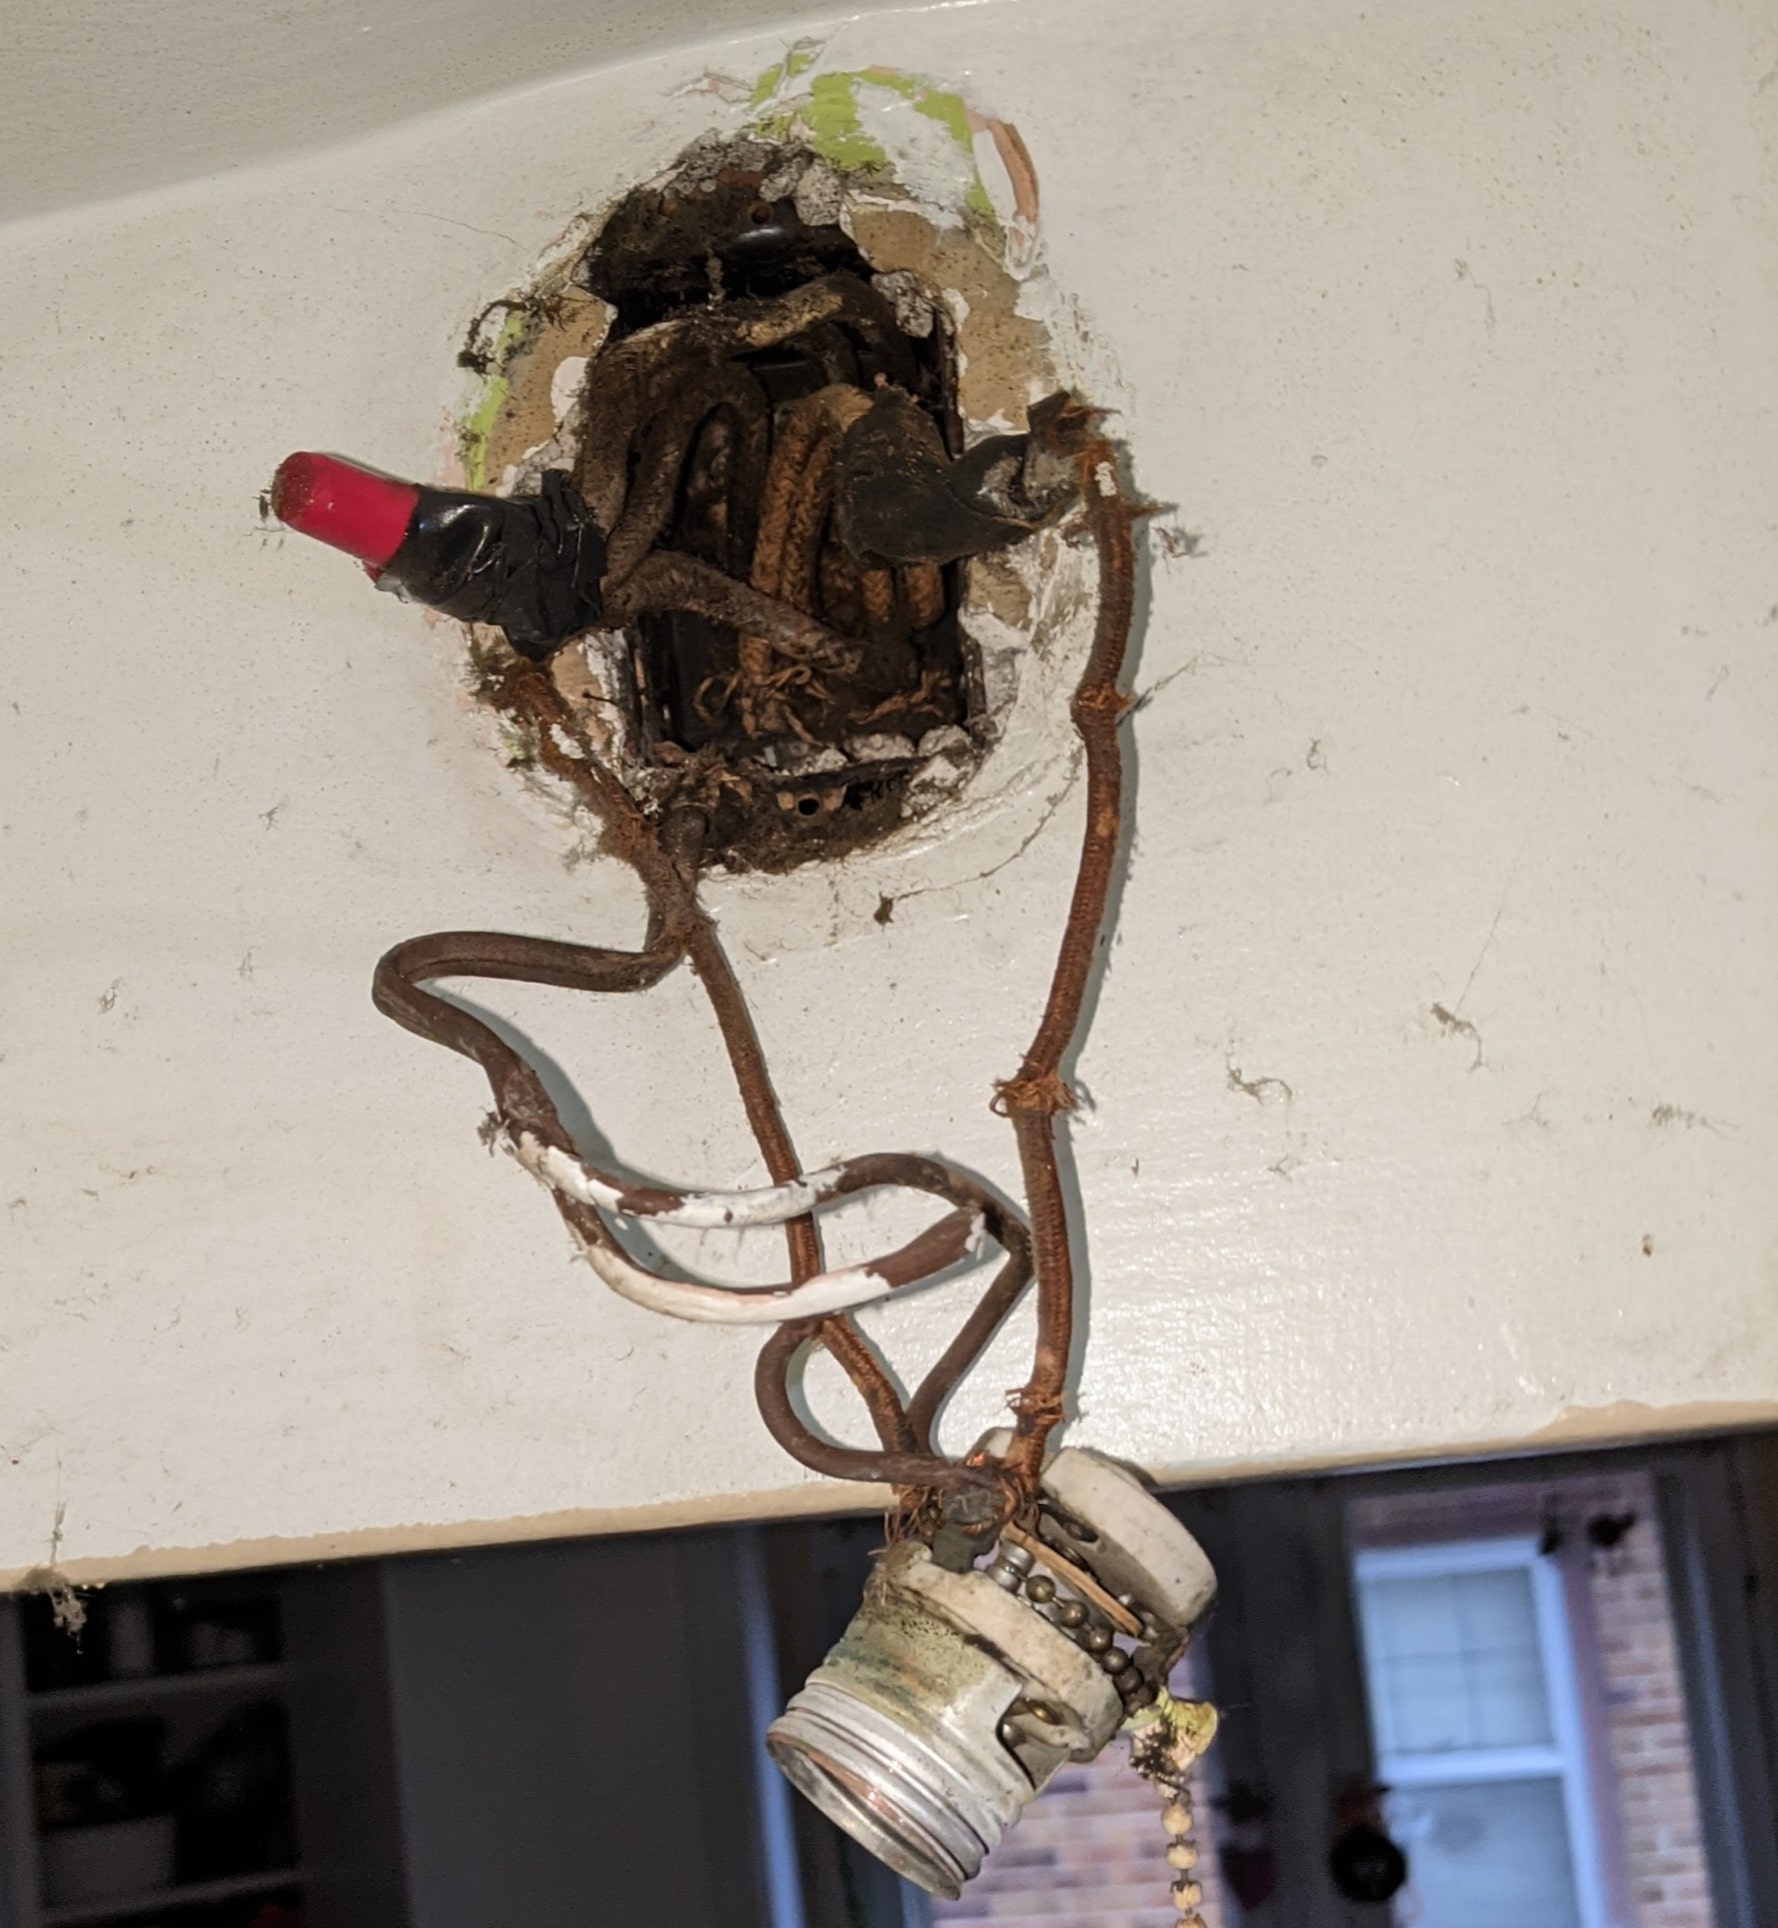 An absolute mess of an electrical box containing 10 wires with crumbling insulation